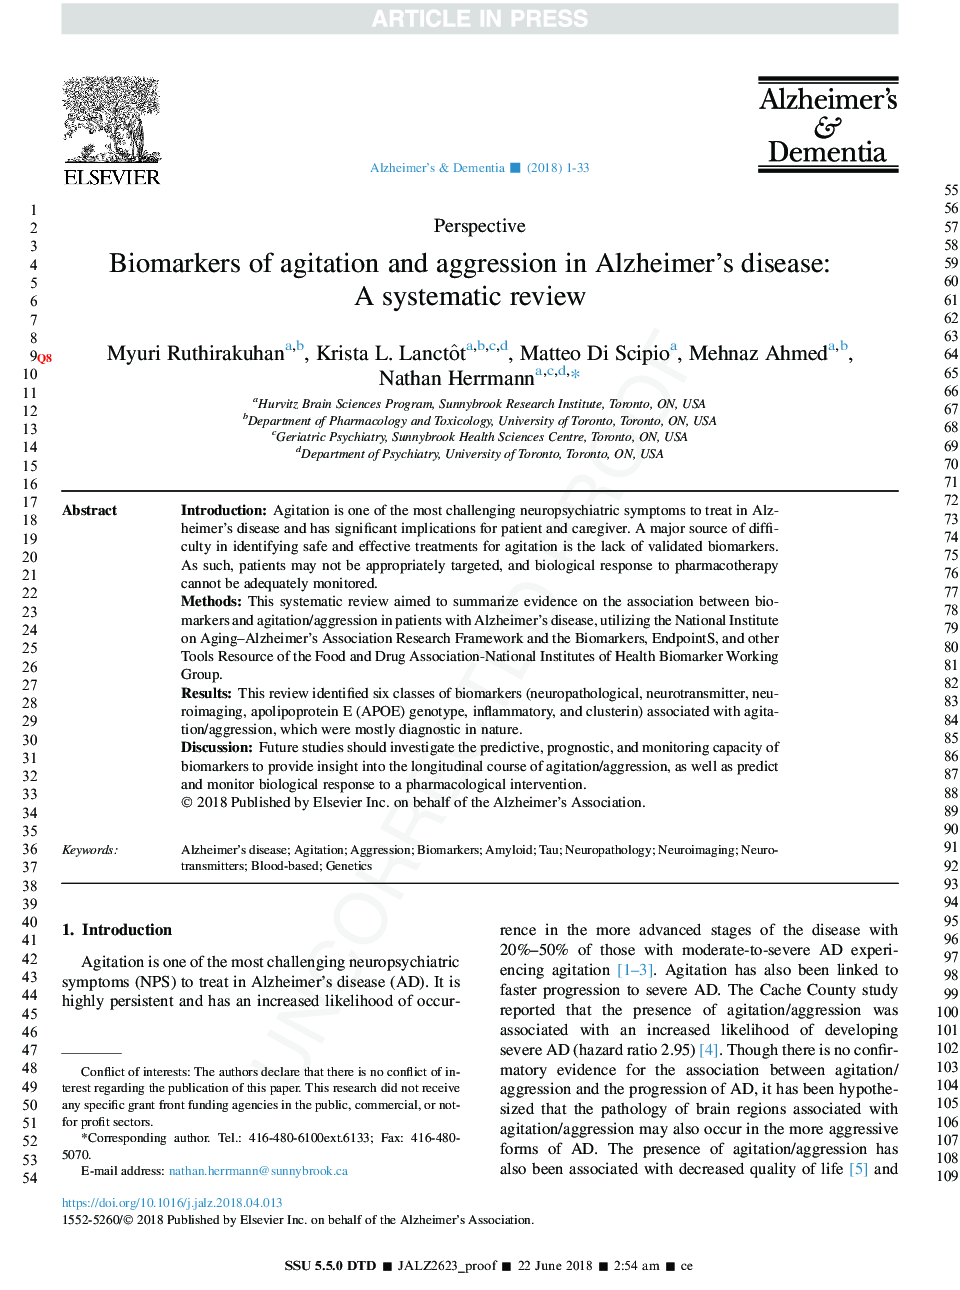 Biomarkers of agitation and aggression in Alzheimer's disease: A systematic review